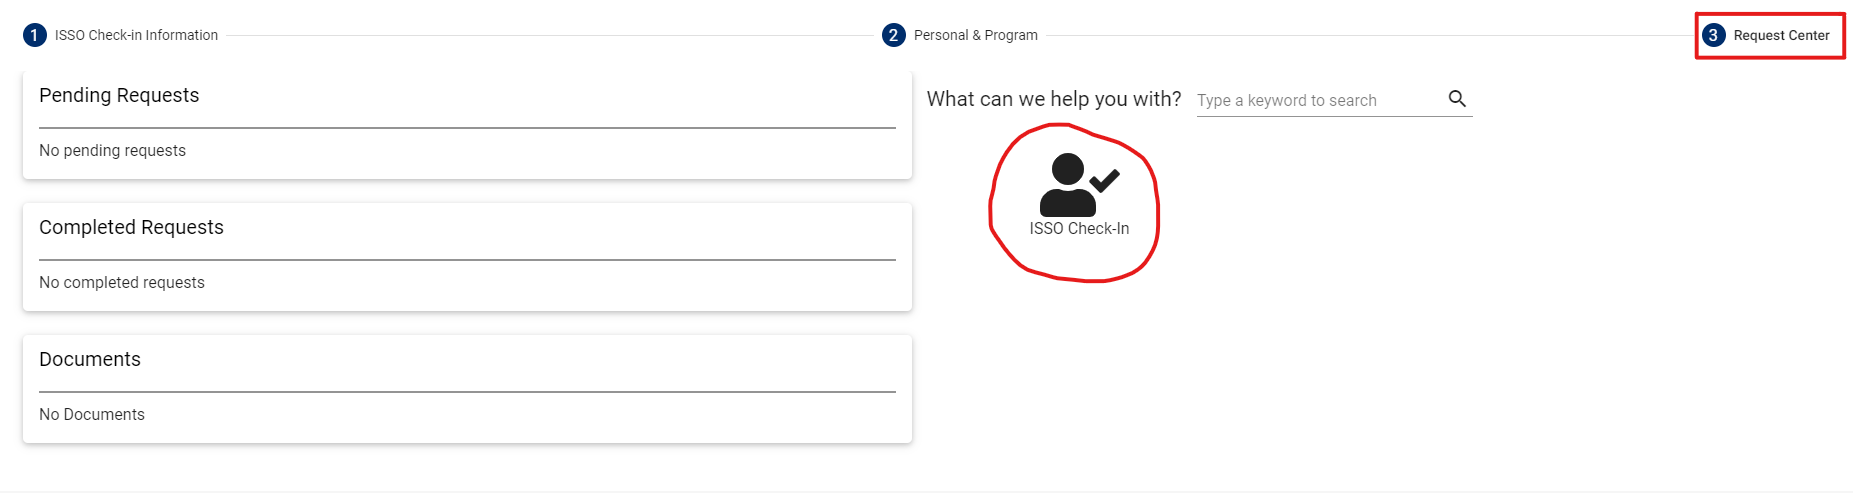 Screenshot of the Request Center tab of the ISSO Portal with ISSO Check-in circled.